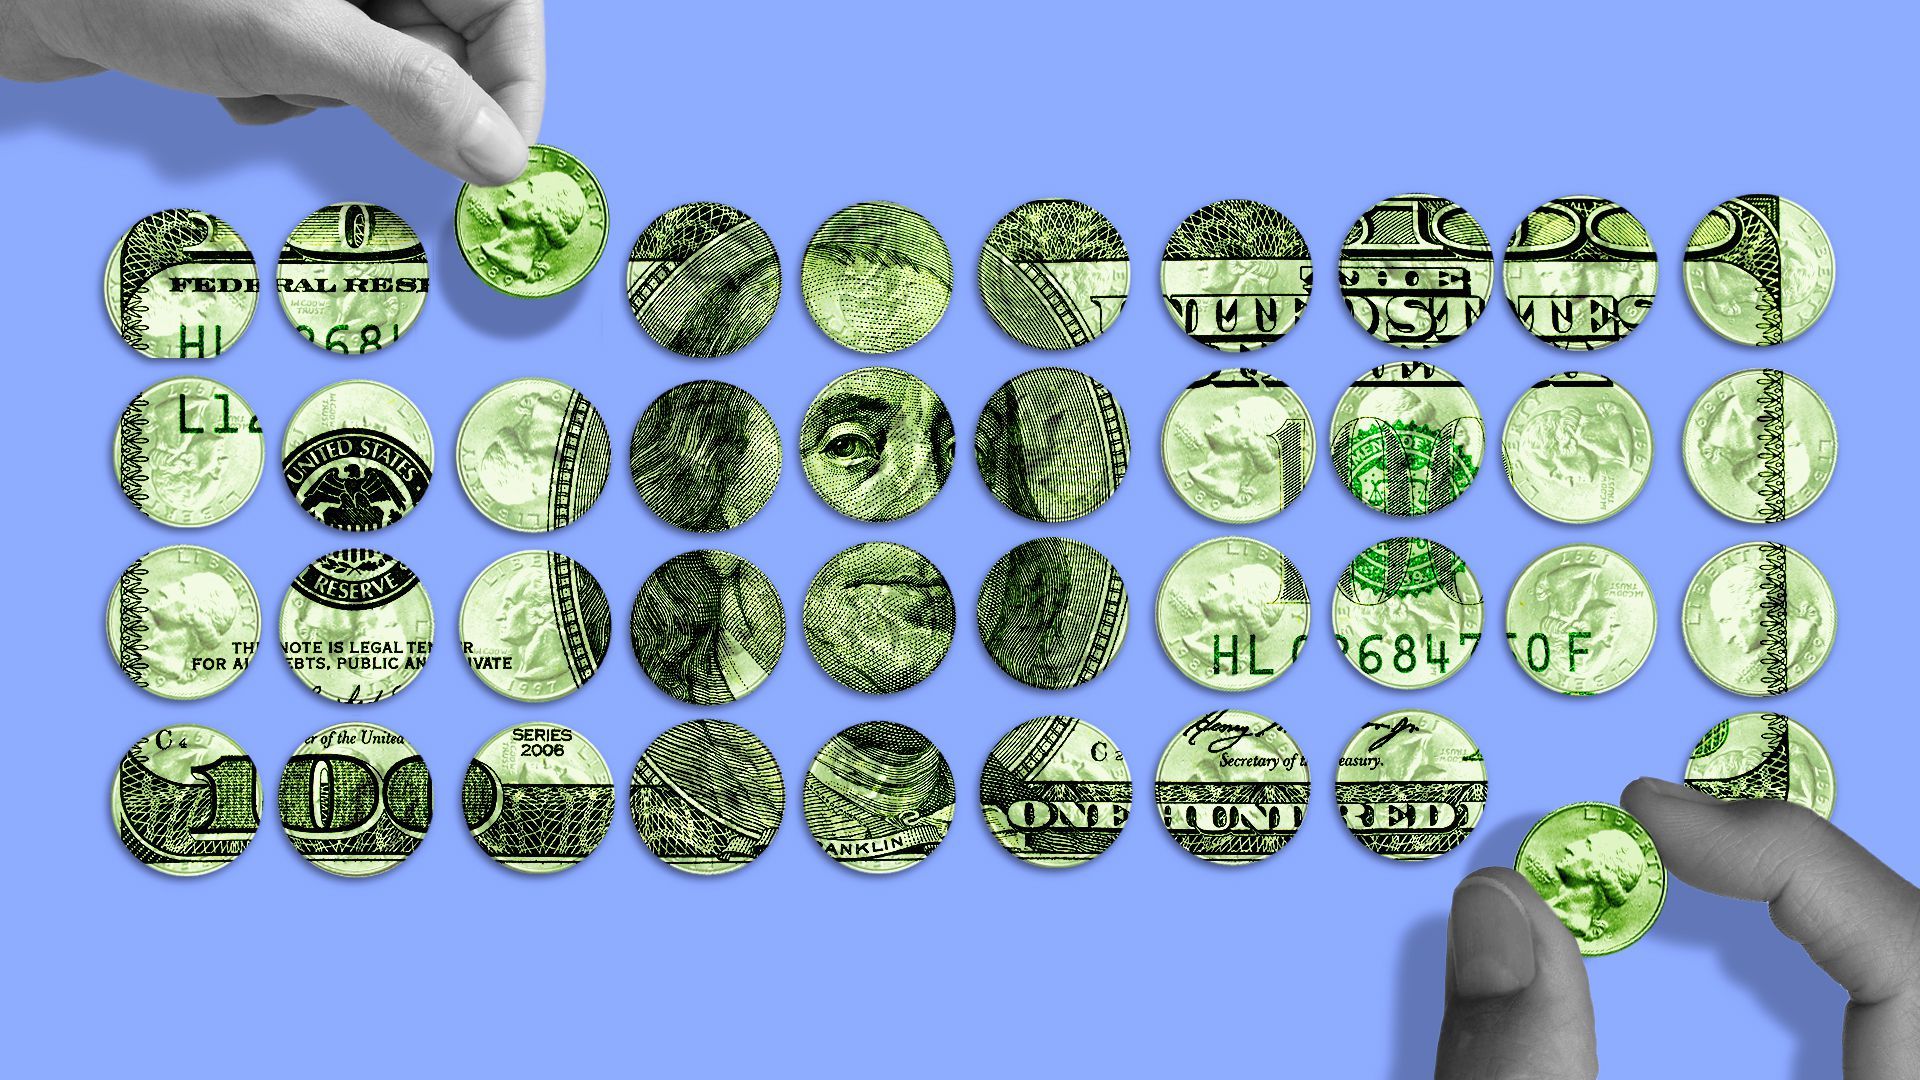 Illustration of hands placing coins into an arrangement creating a one hundred dollar bill